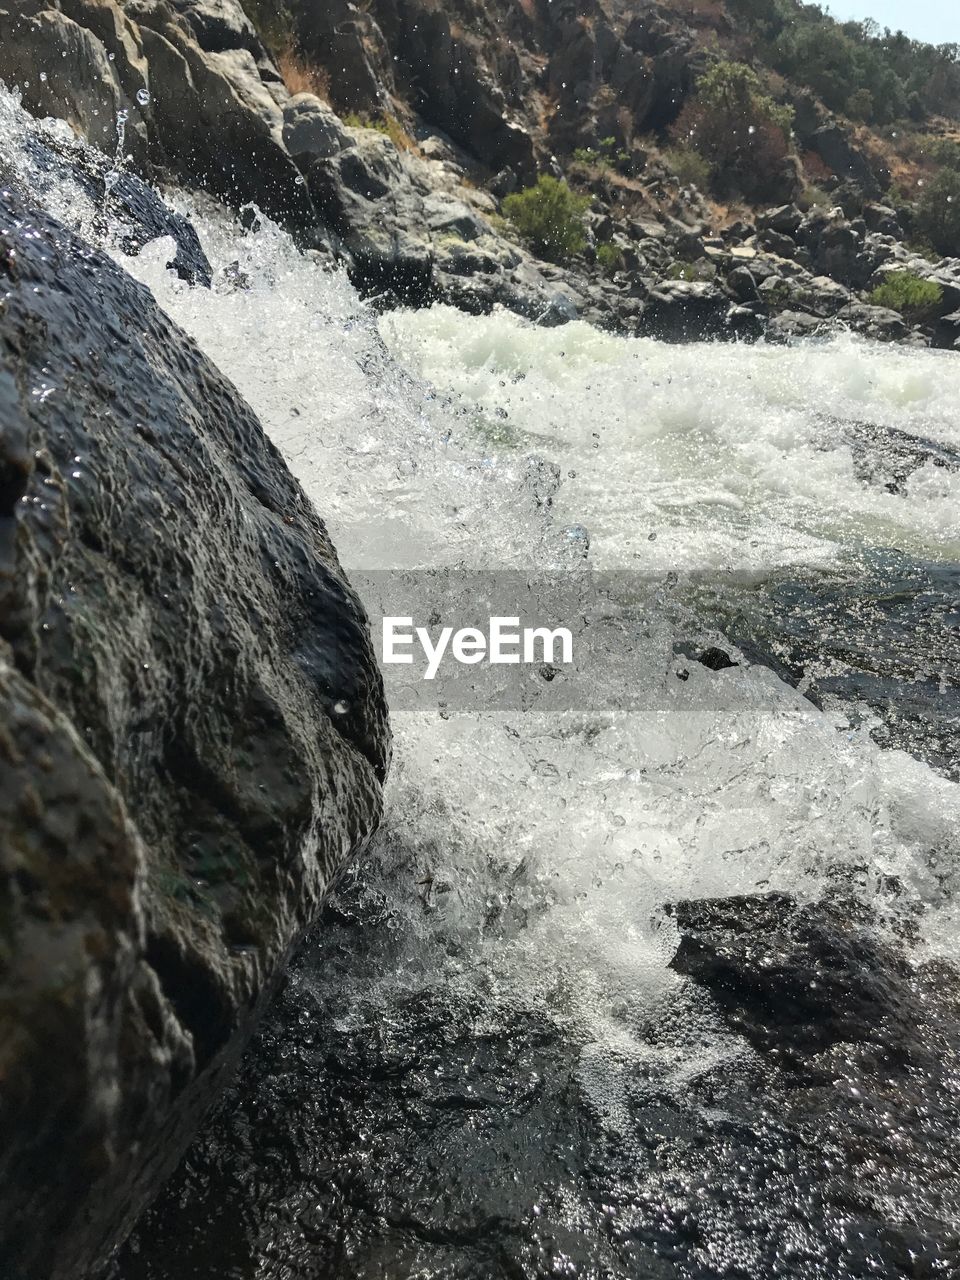 CLOSE-UP OF WATER FLOWING THROUGH ROCKS